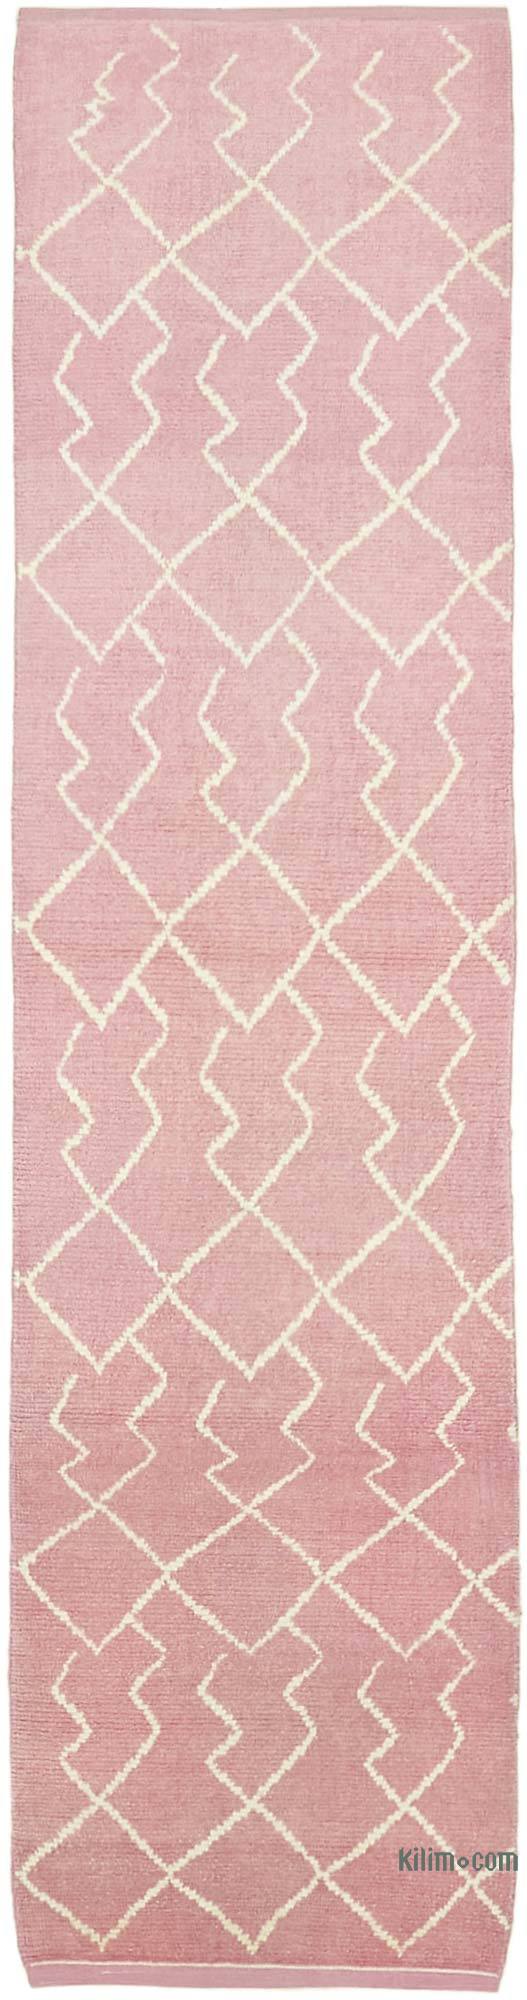 New Moroccan Style Hand-Knotted Runner - 2' 11" x 11' 7" (35 in. x 139 in.) - K0057570